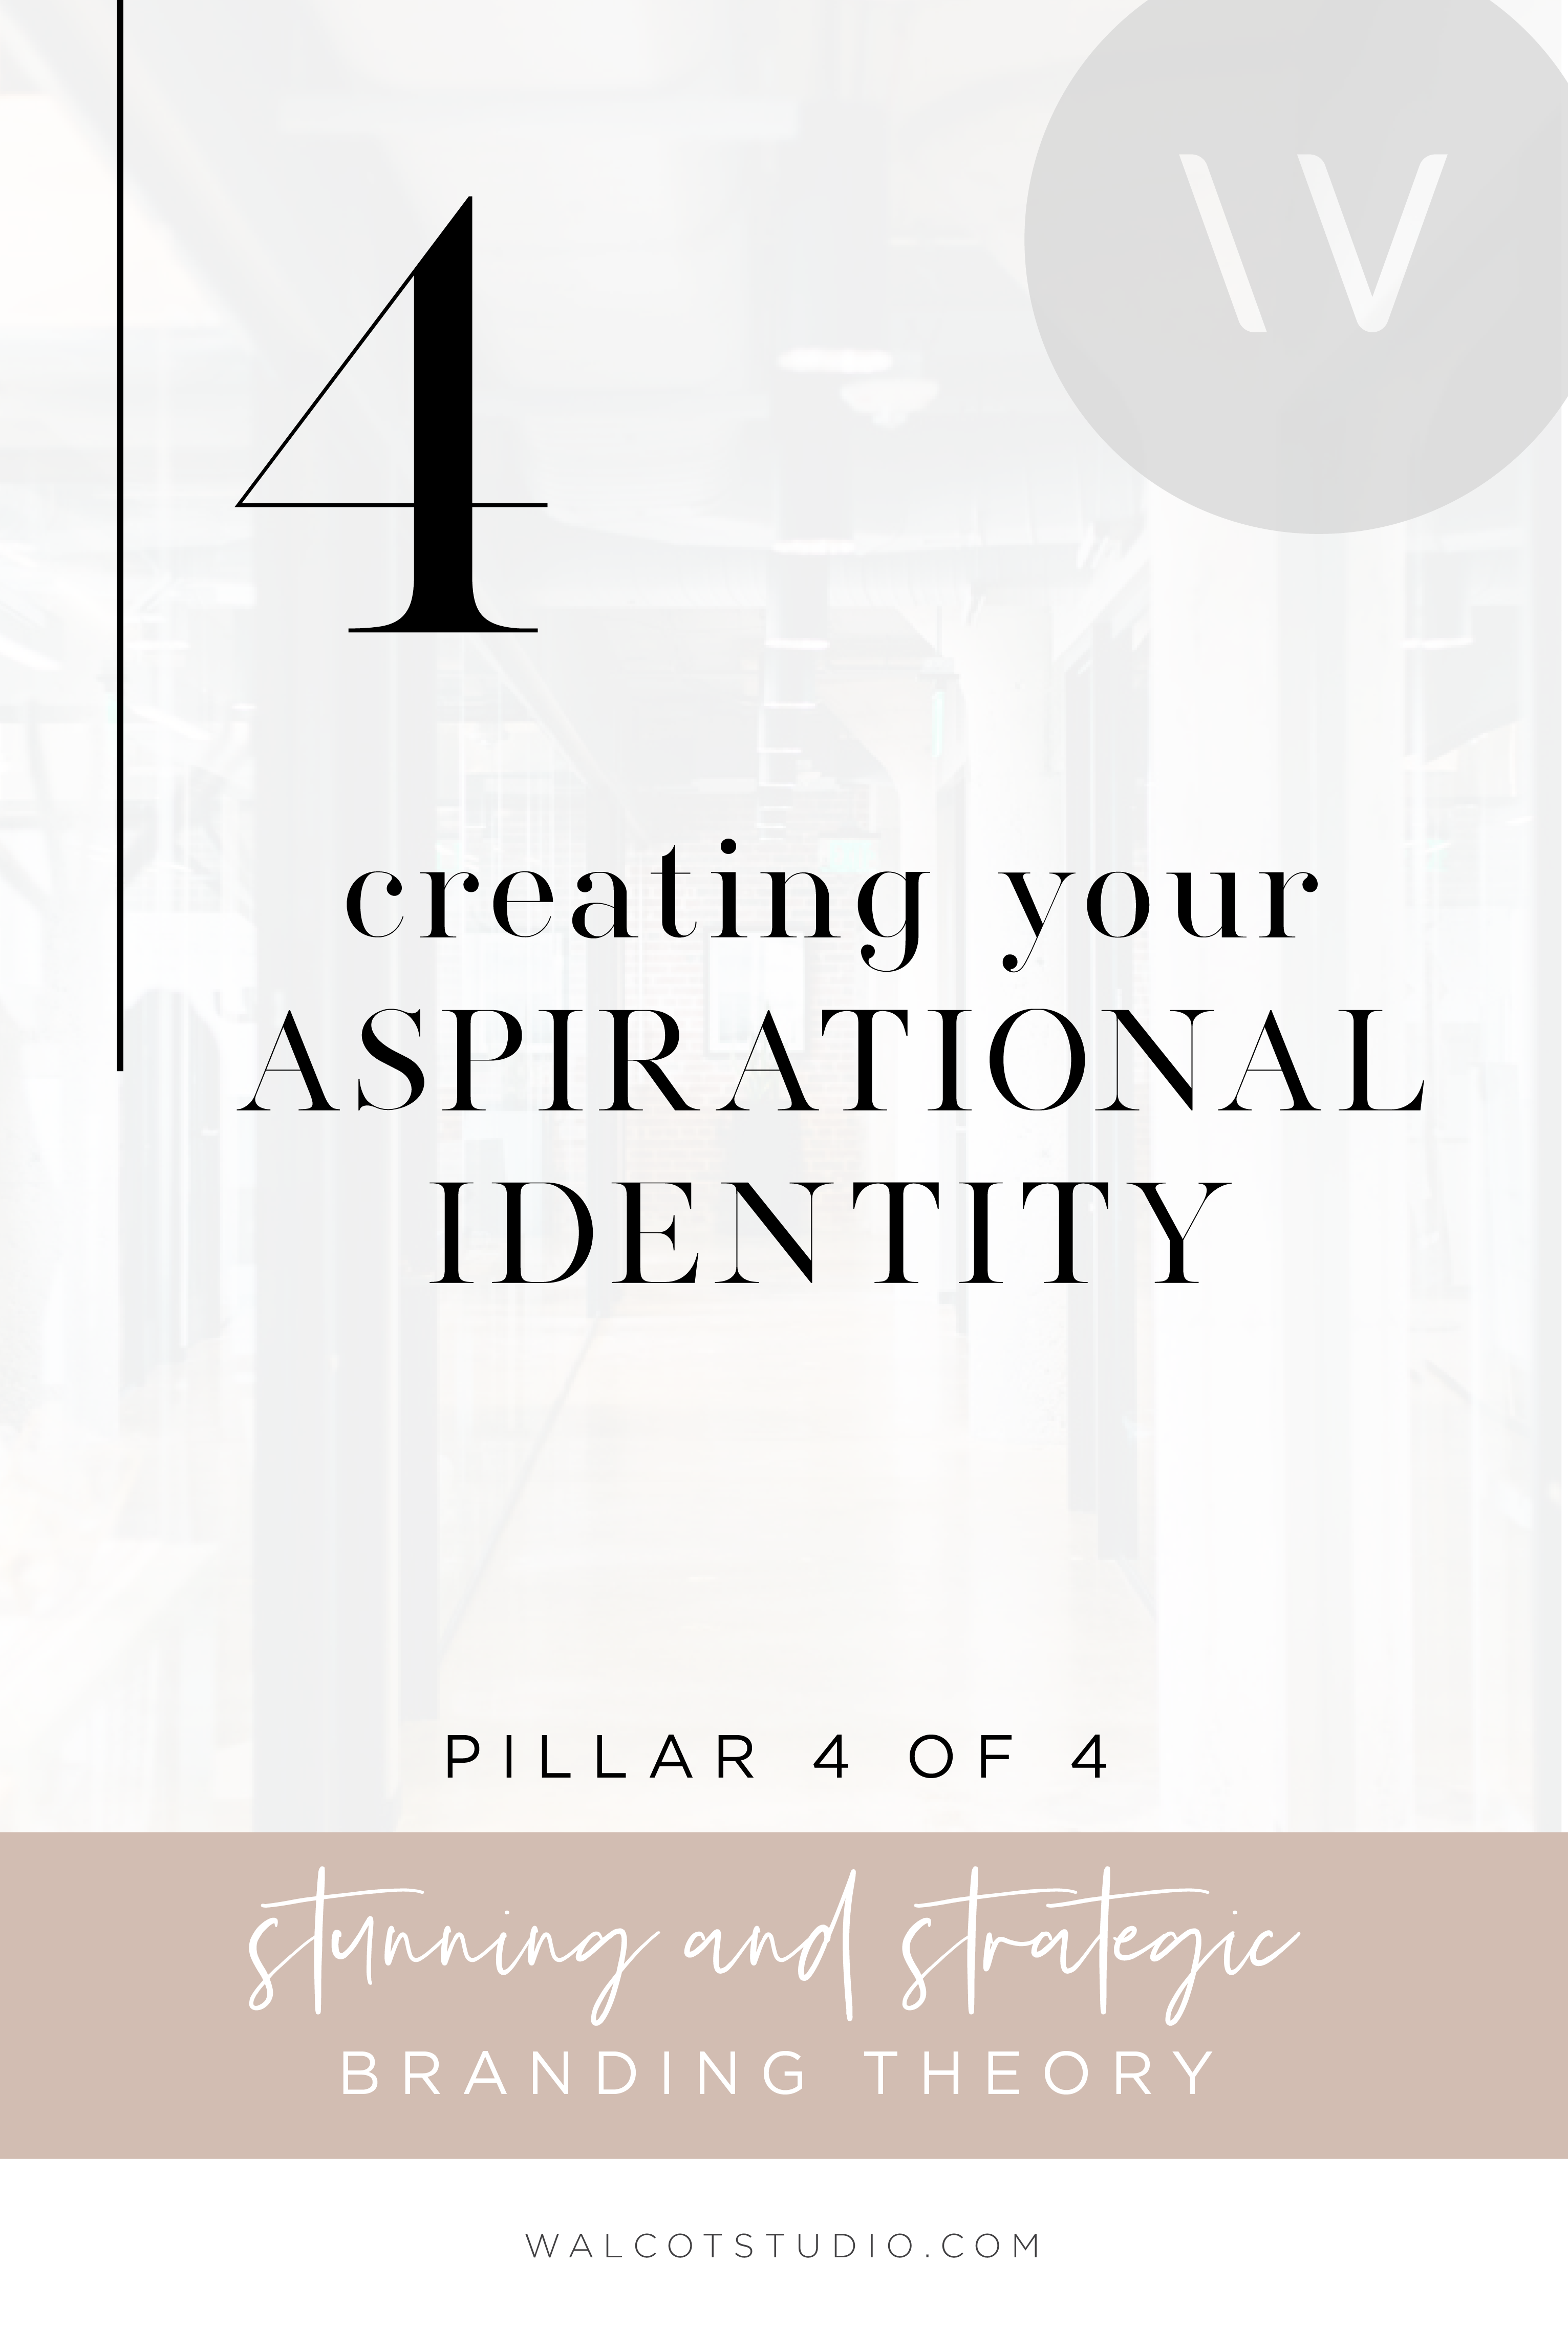 Creating Your Aspirational Brand Identity by Walcot Studios